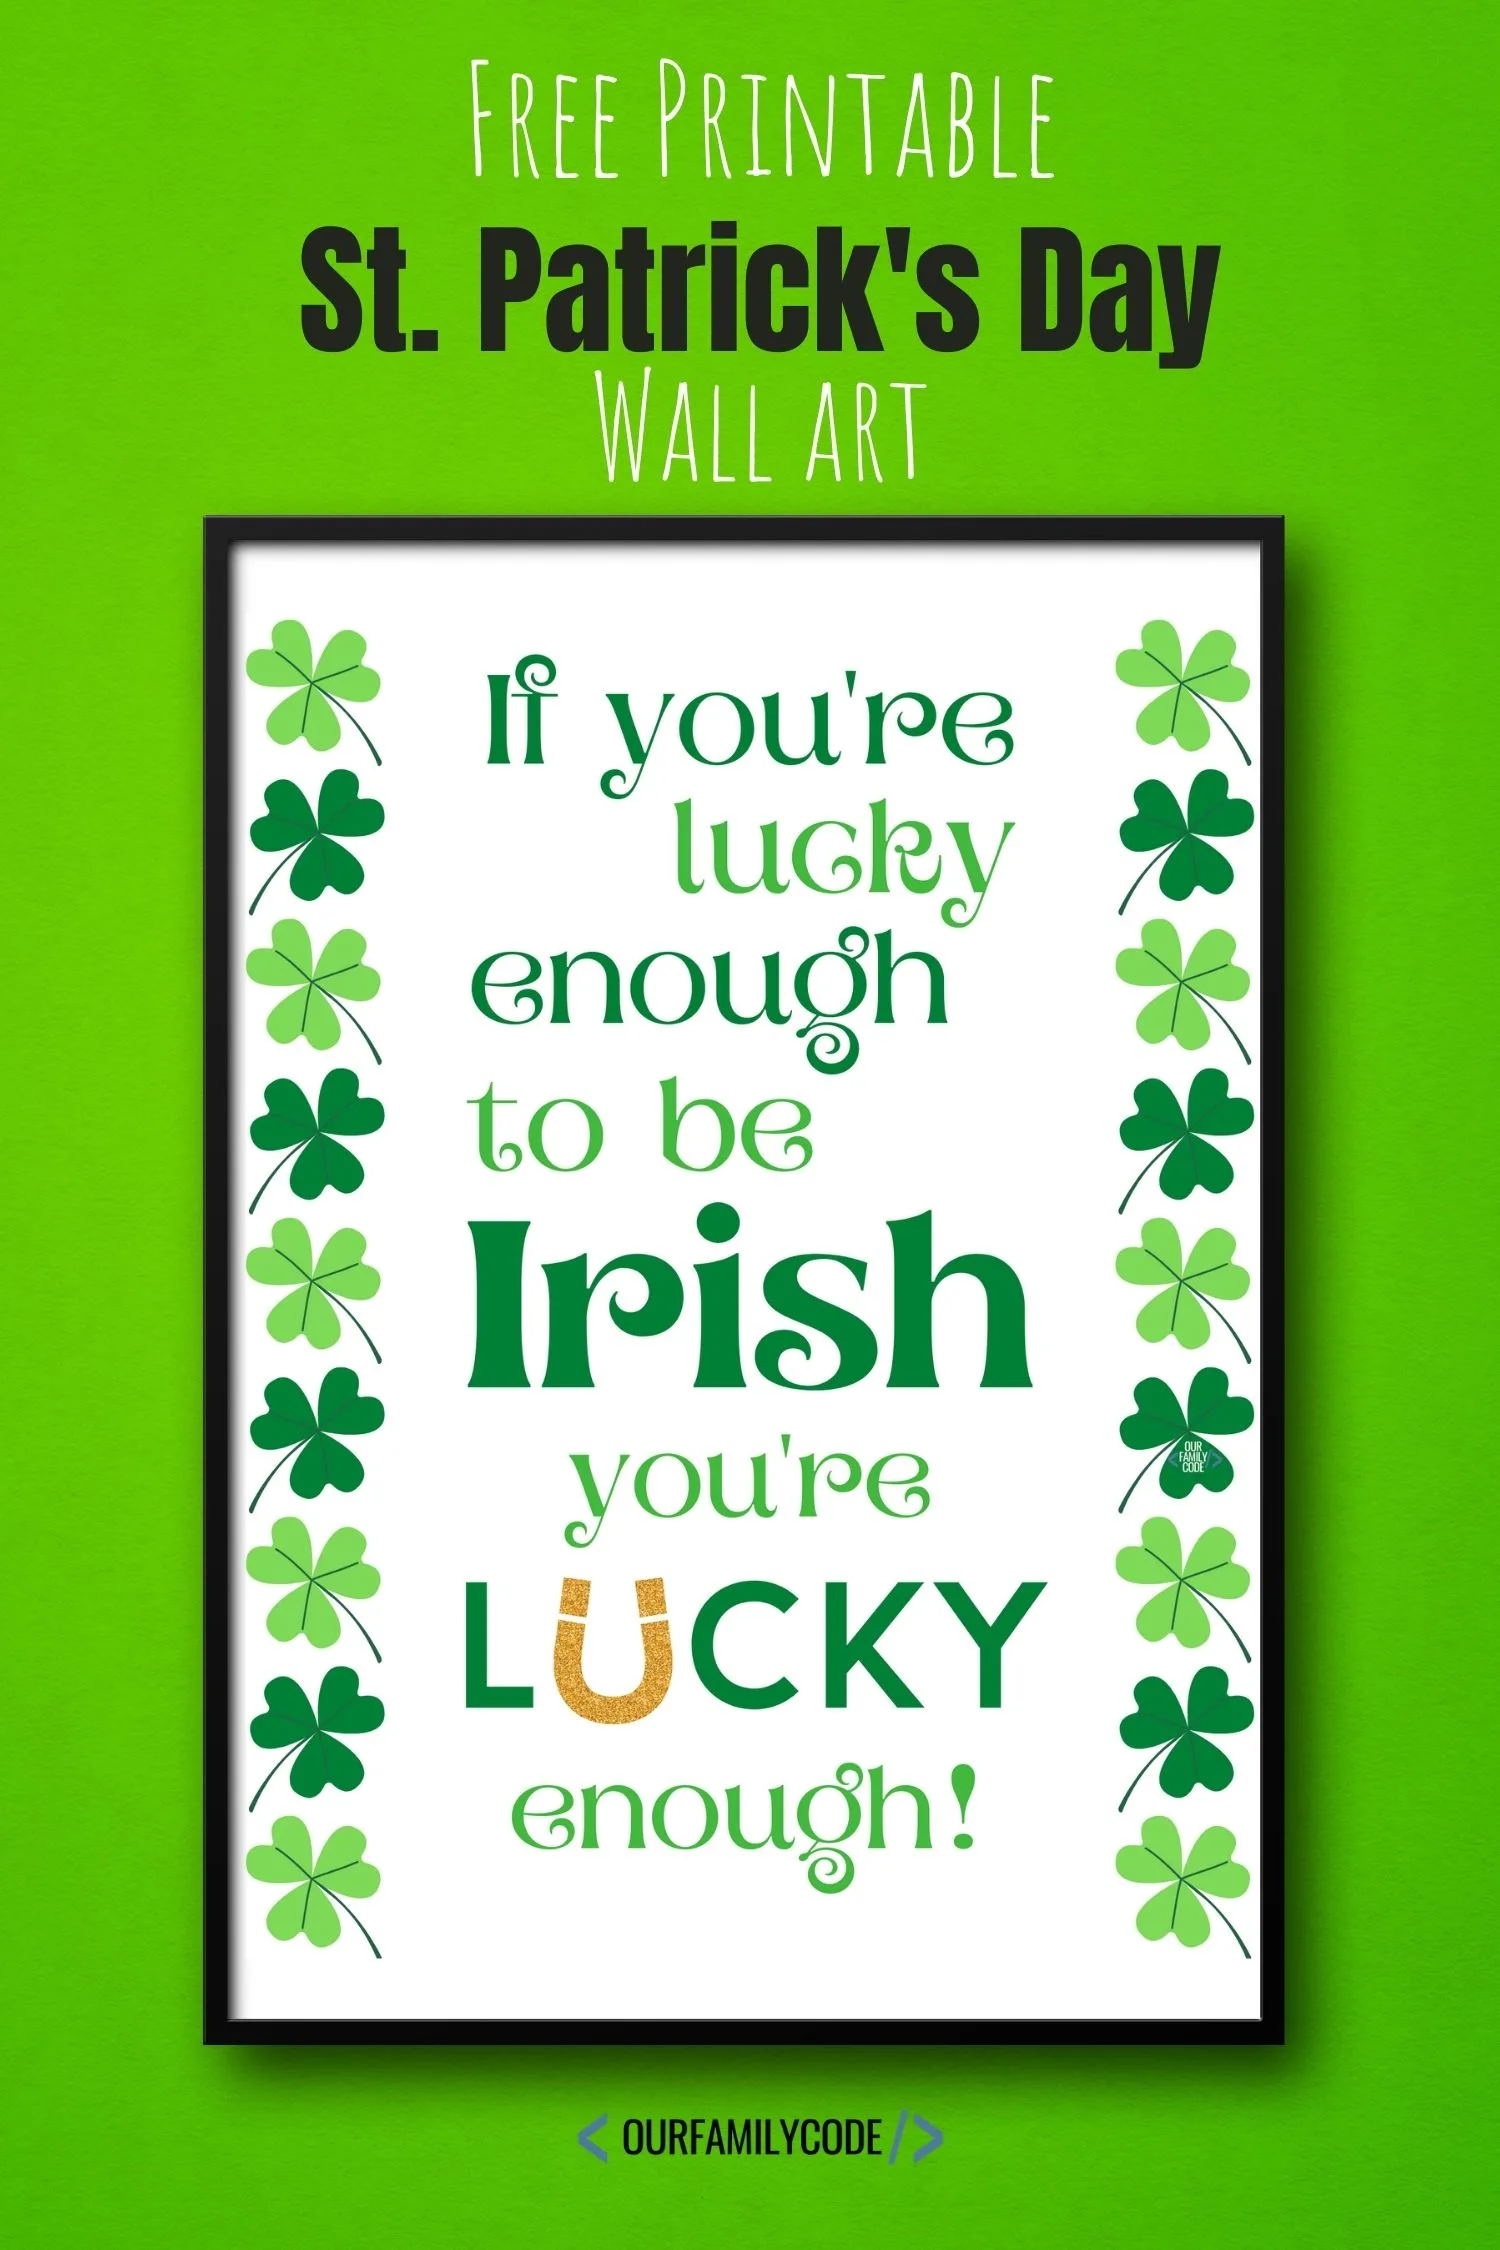 A picture of a St. Patrick's Day sign that says "if you're lucky enough to be Irish, you're lucky enough".